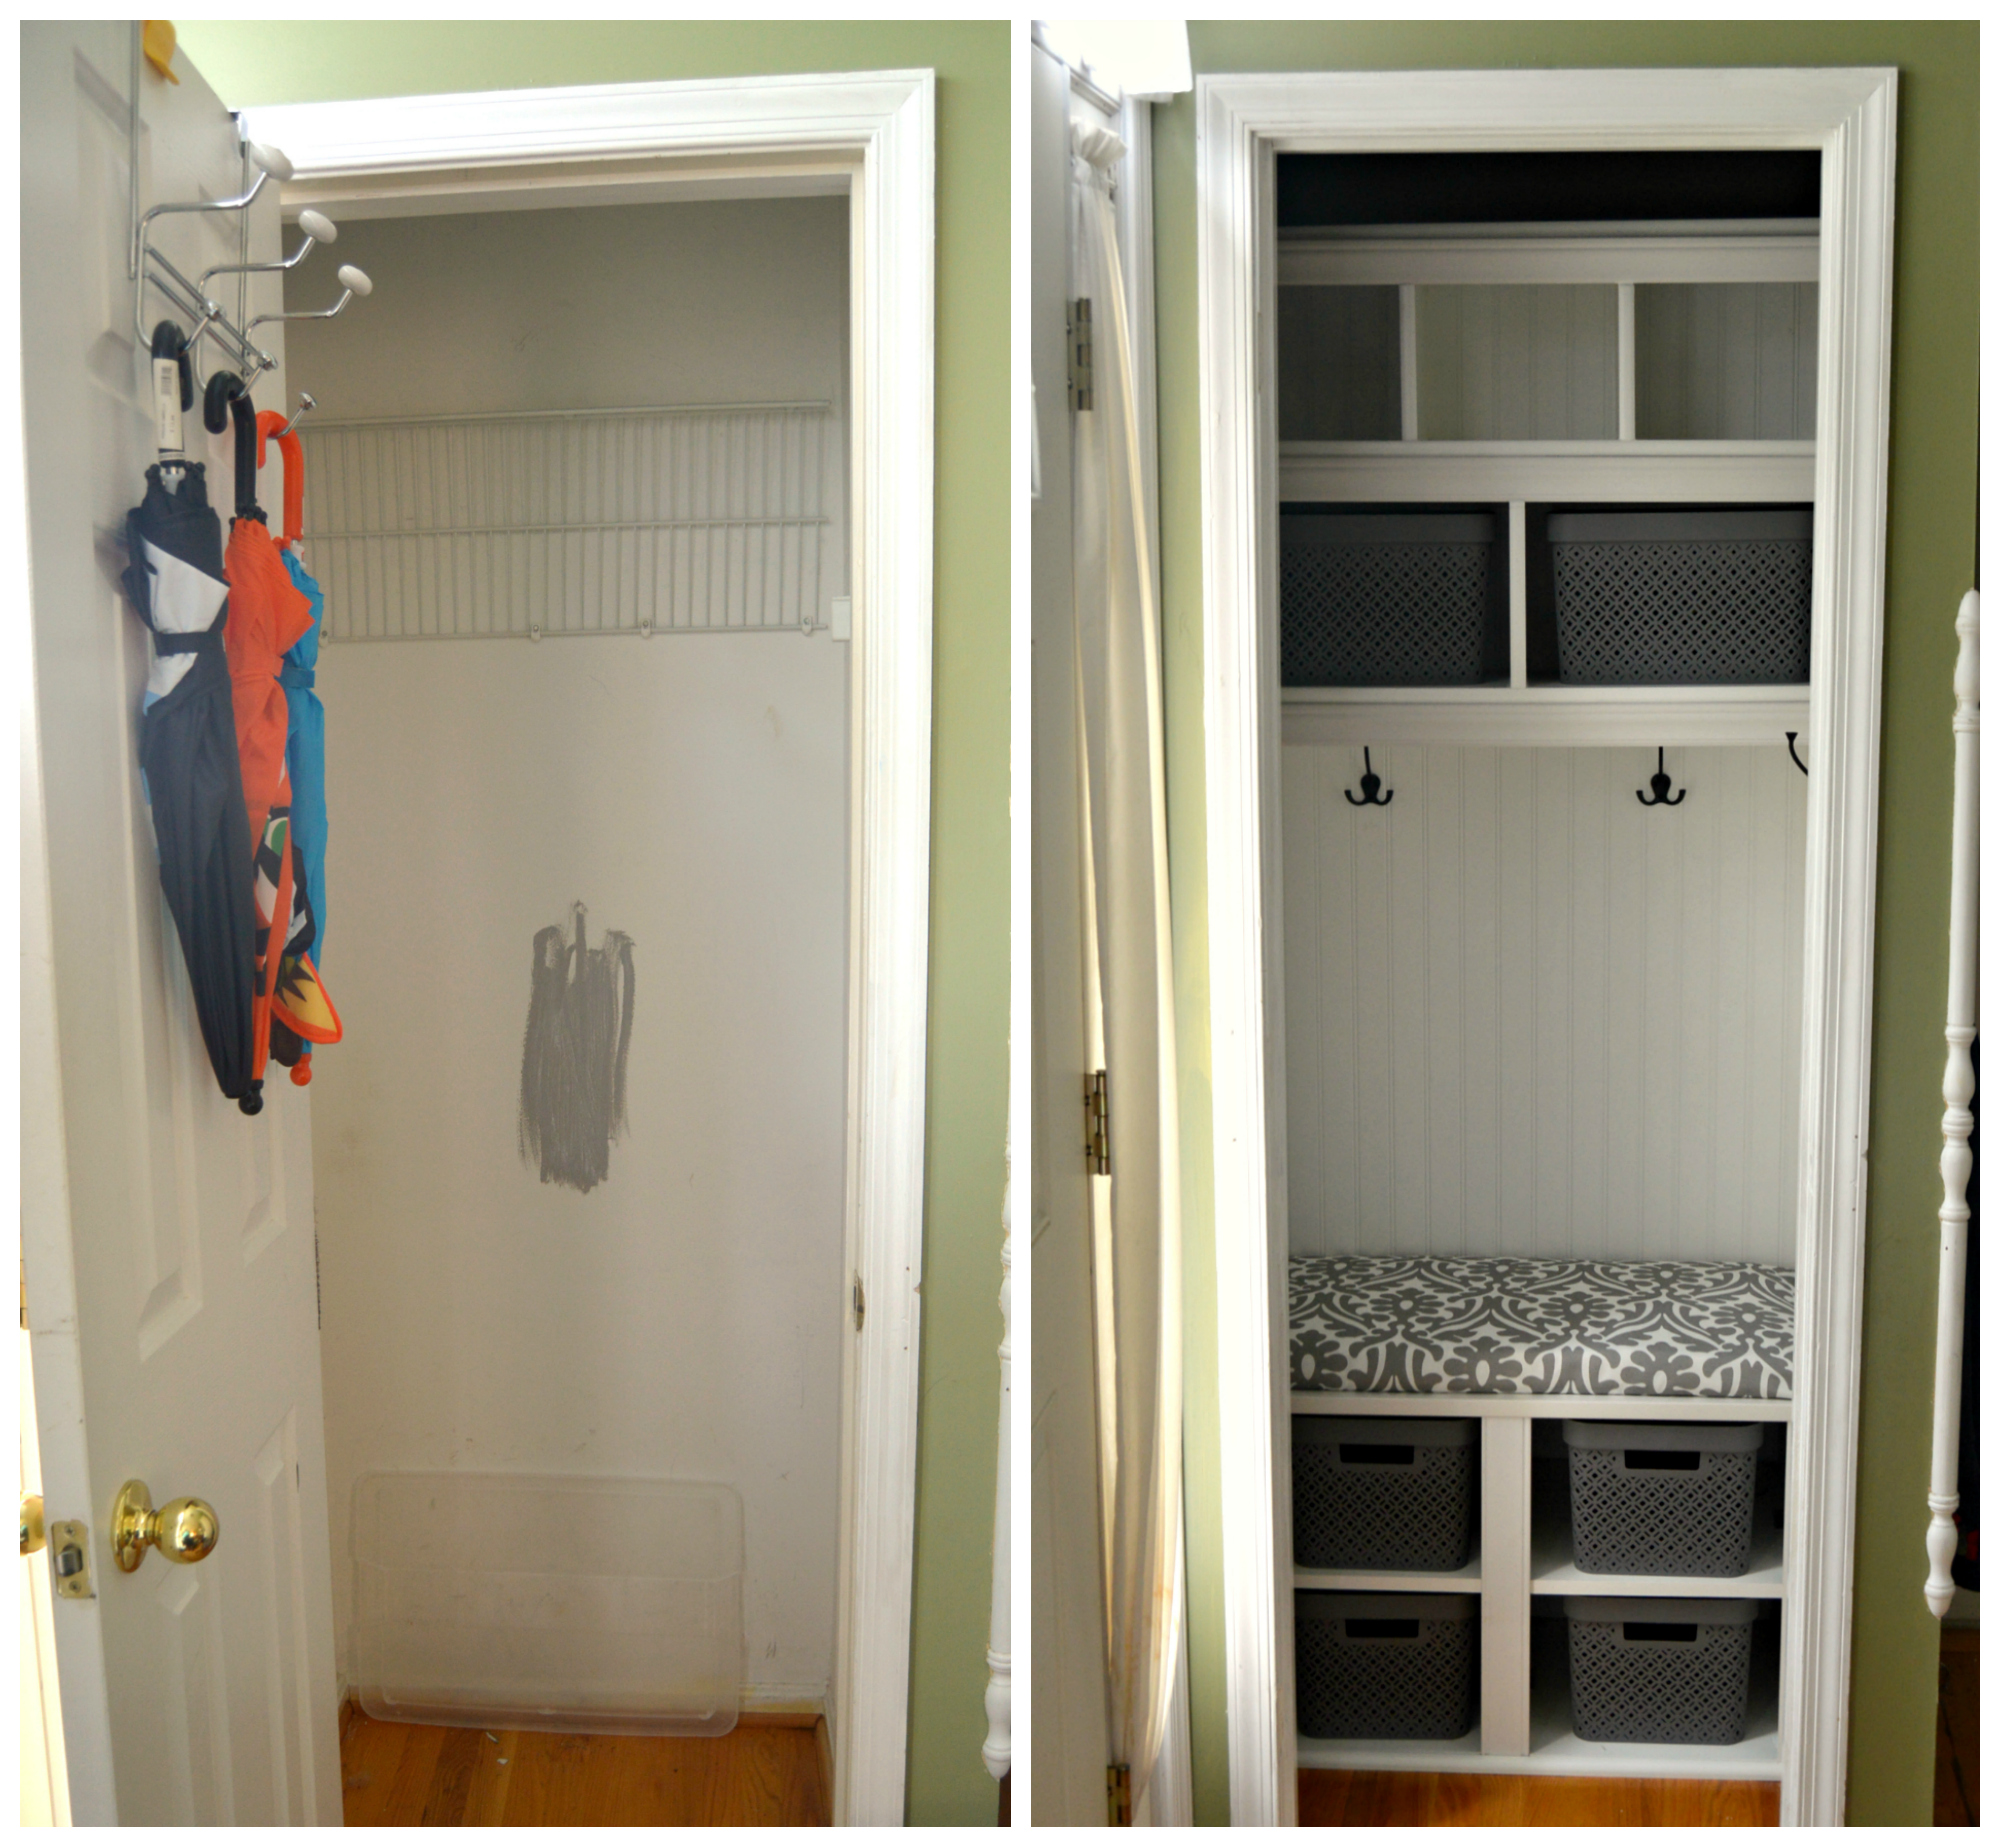 How to Turn a Closet into a Mudroom - Simple Made Pretty ()